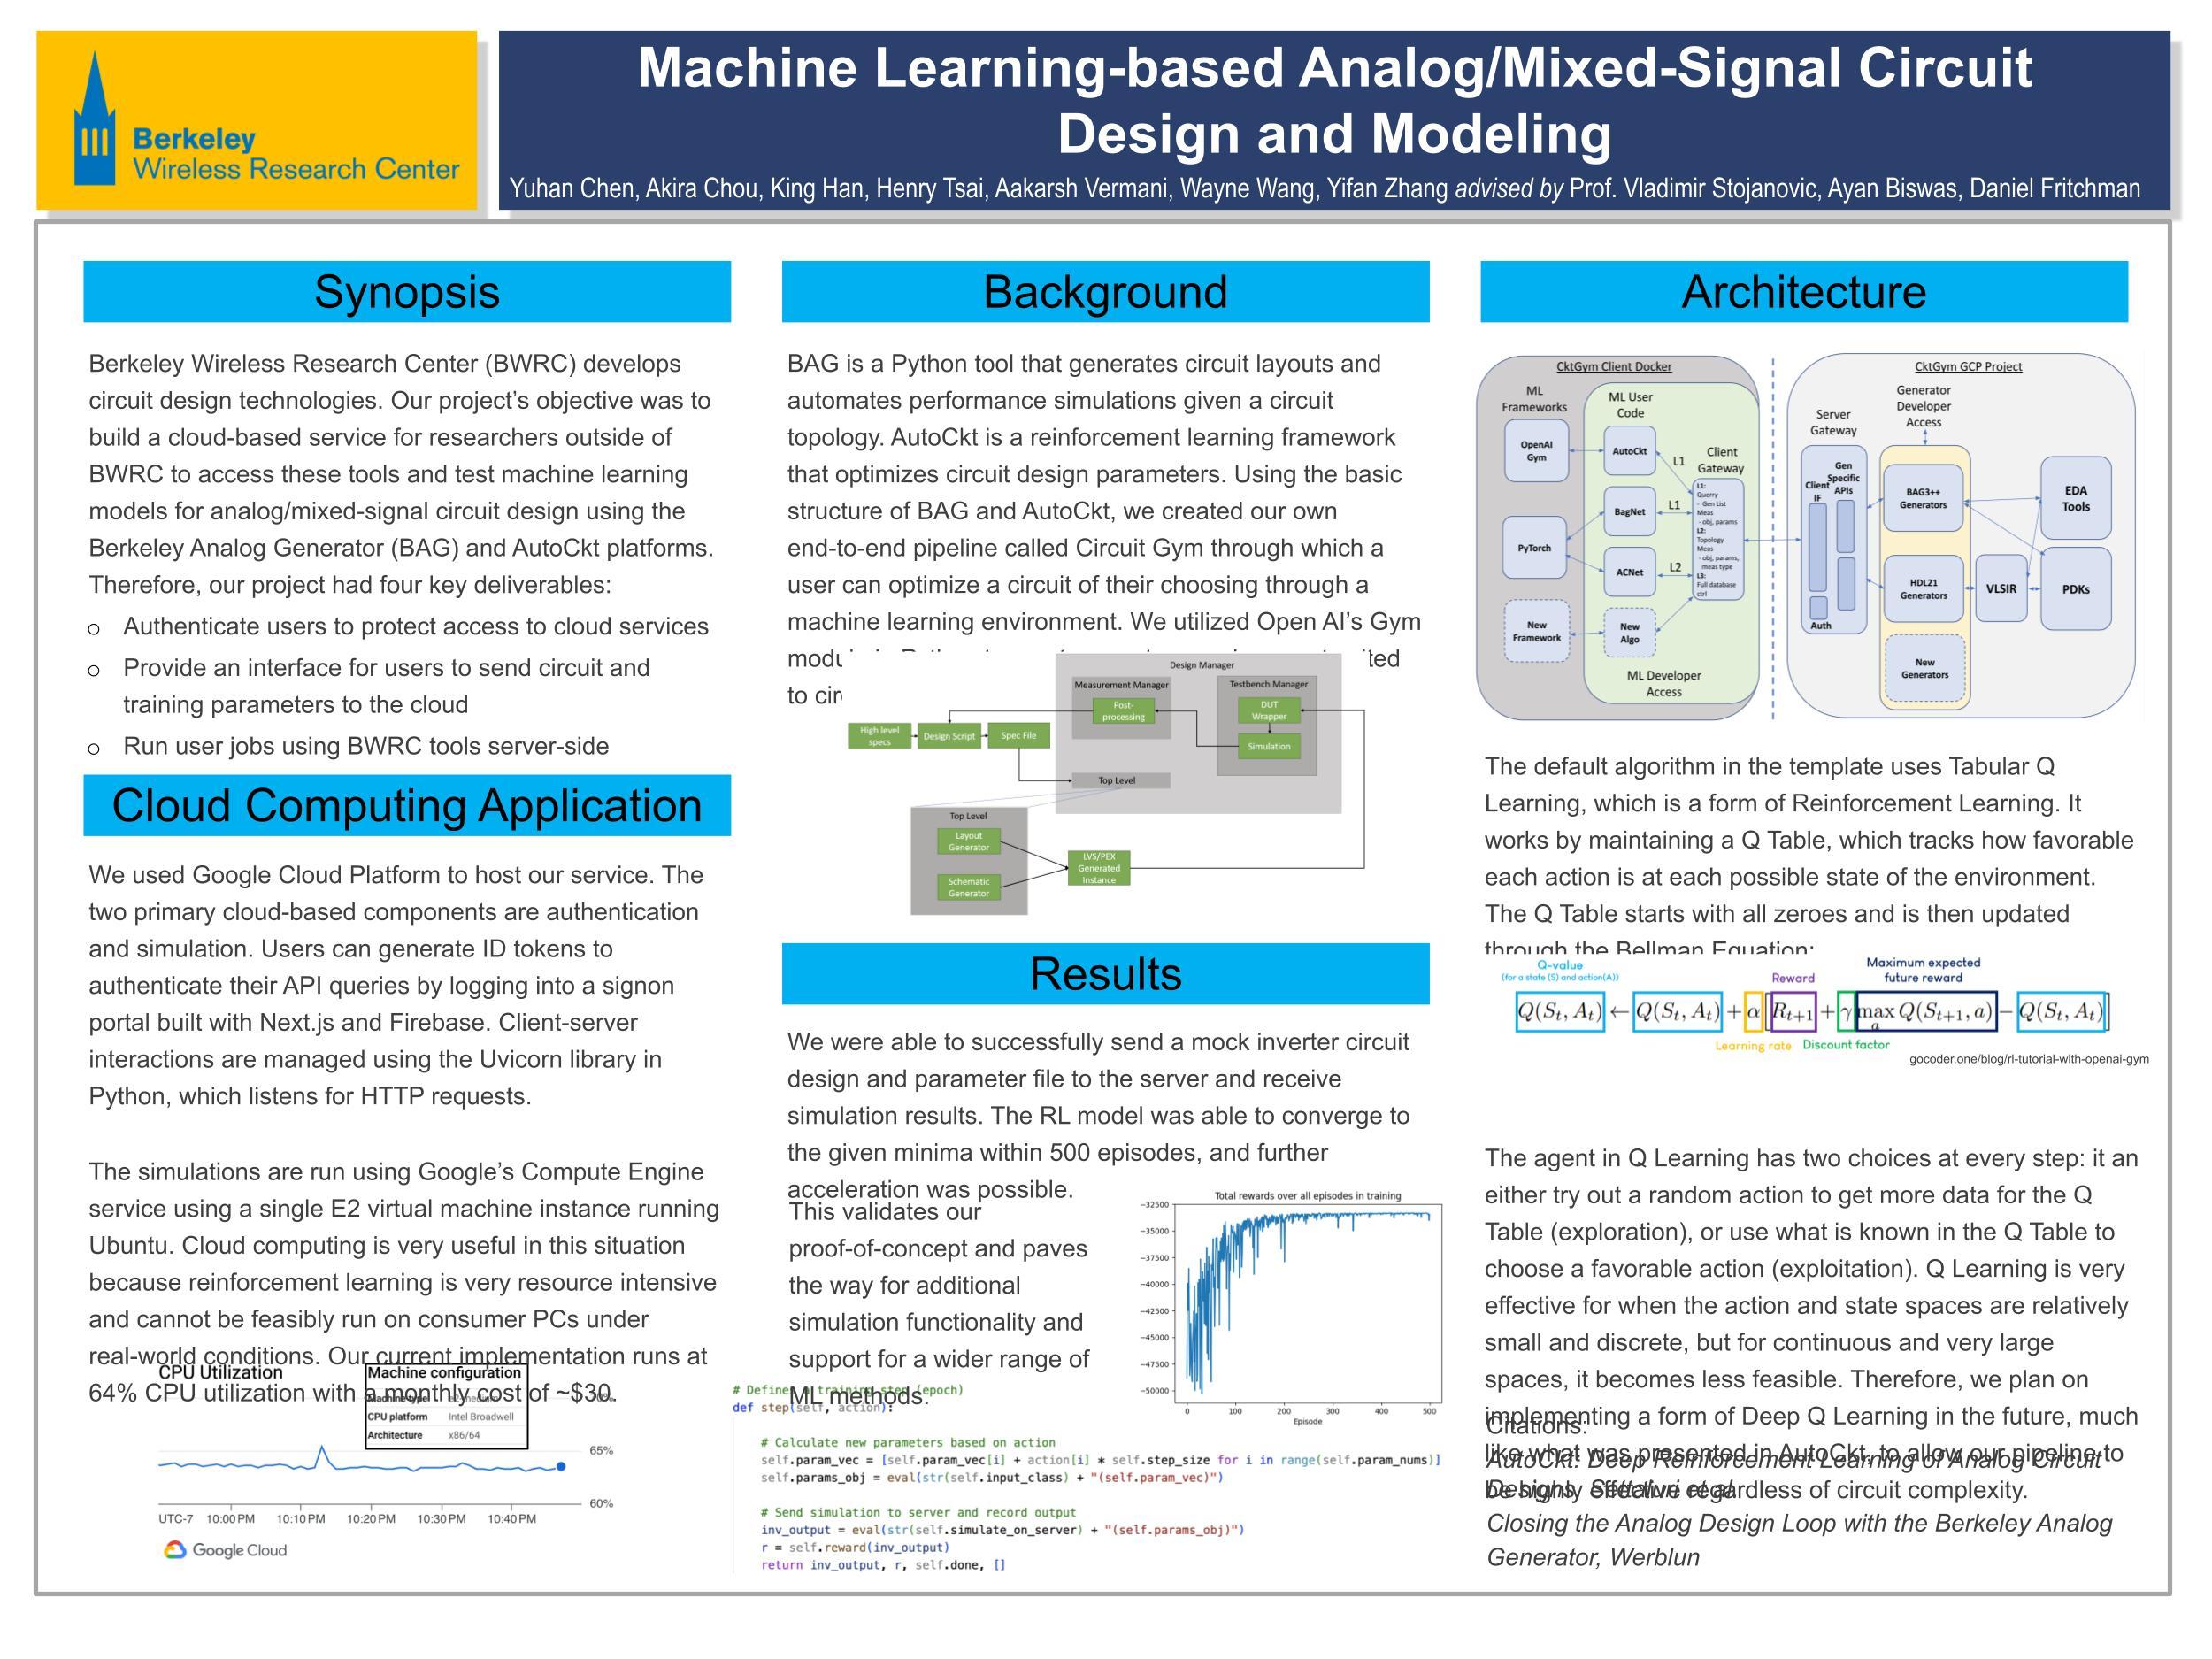 Machine Learning-based Analog/Mixed-Signal Circuit Design and Modeling - Spring 2023 Discovery Project